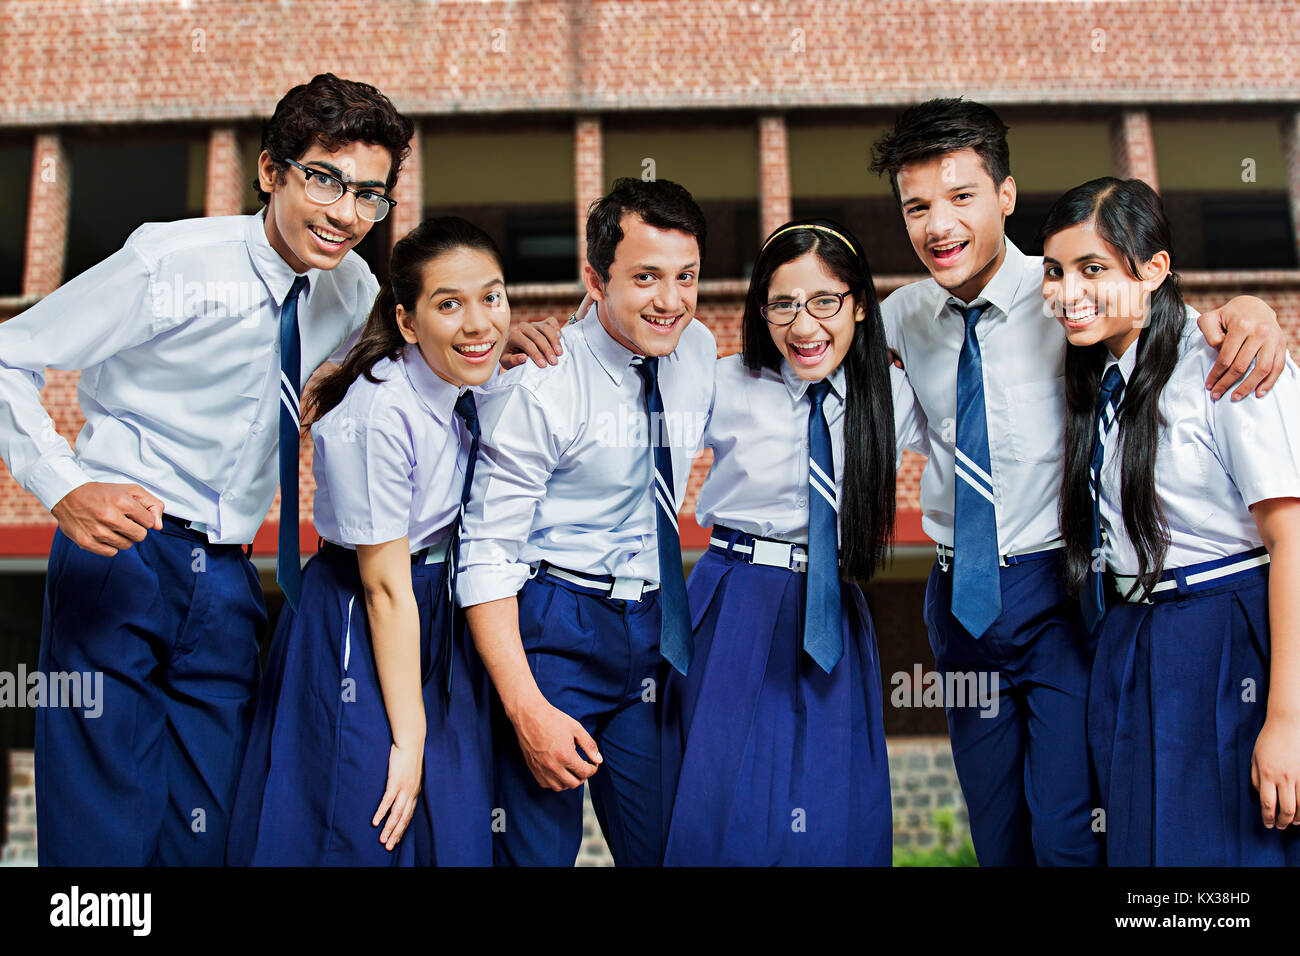 Indian Group High School Students Friends Standing Together Campus Enjoying Stock Photo